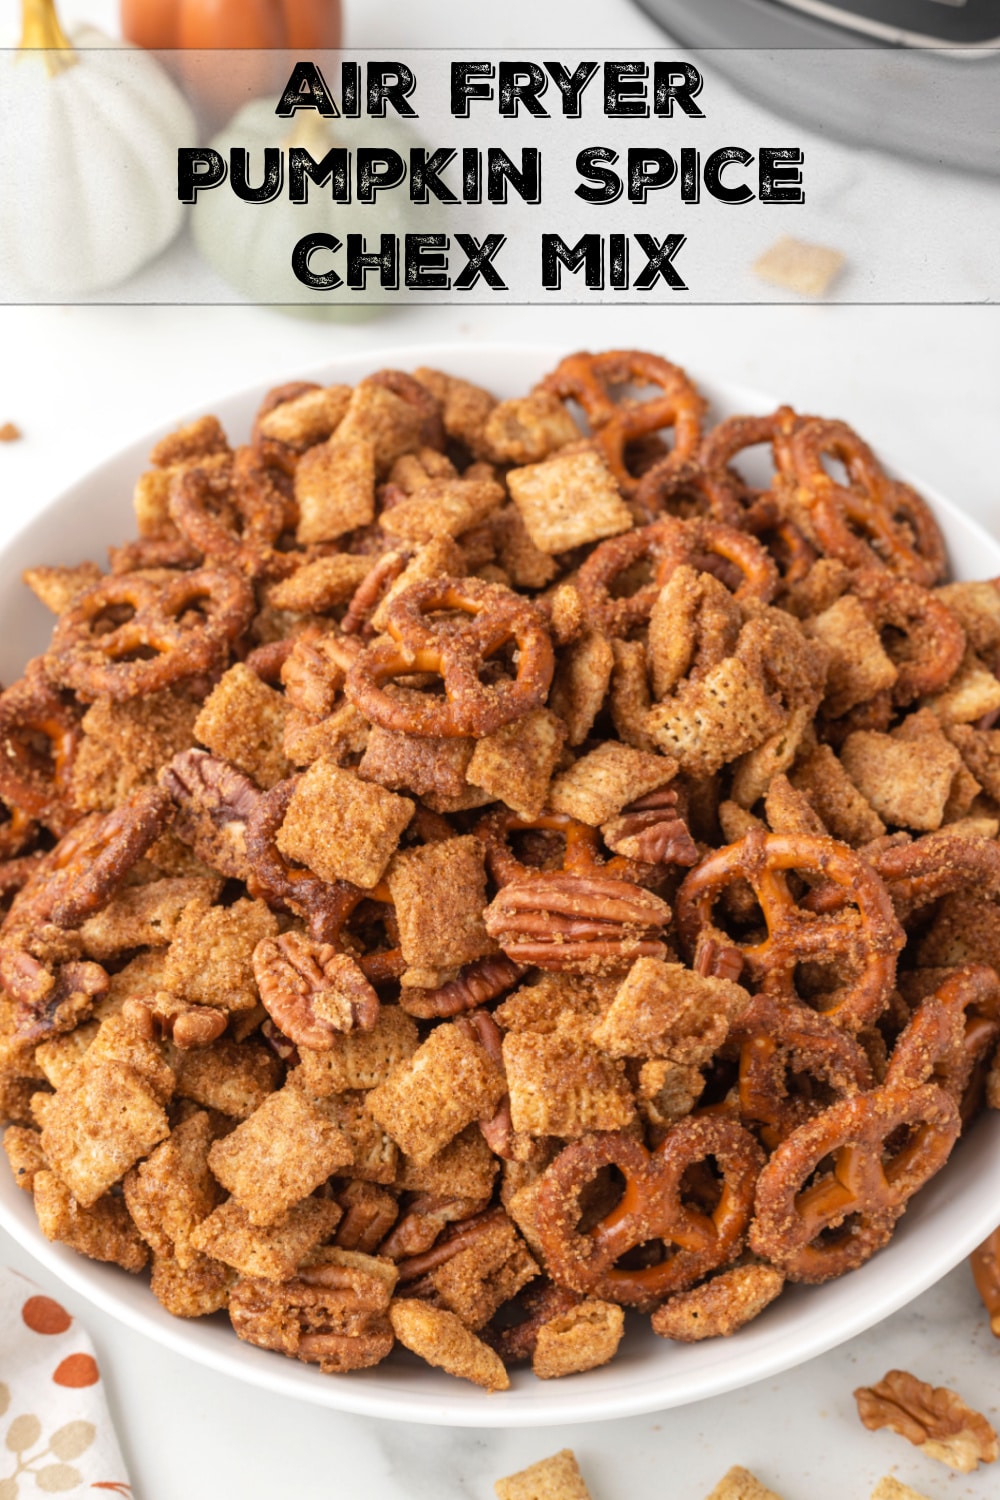 A seasonal sweet and crunchy cereal mix, made conveniently in the air fryer. This Pumpkin Spice Chex Mix is a must this holiday season. via @cmpollak1